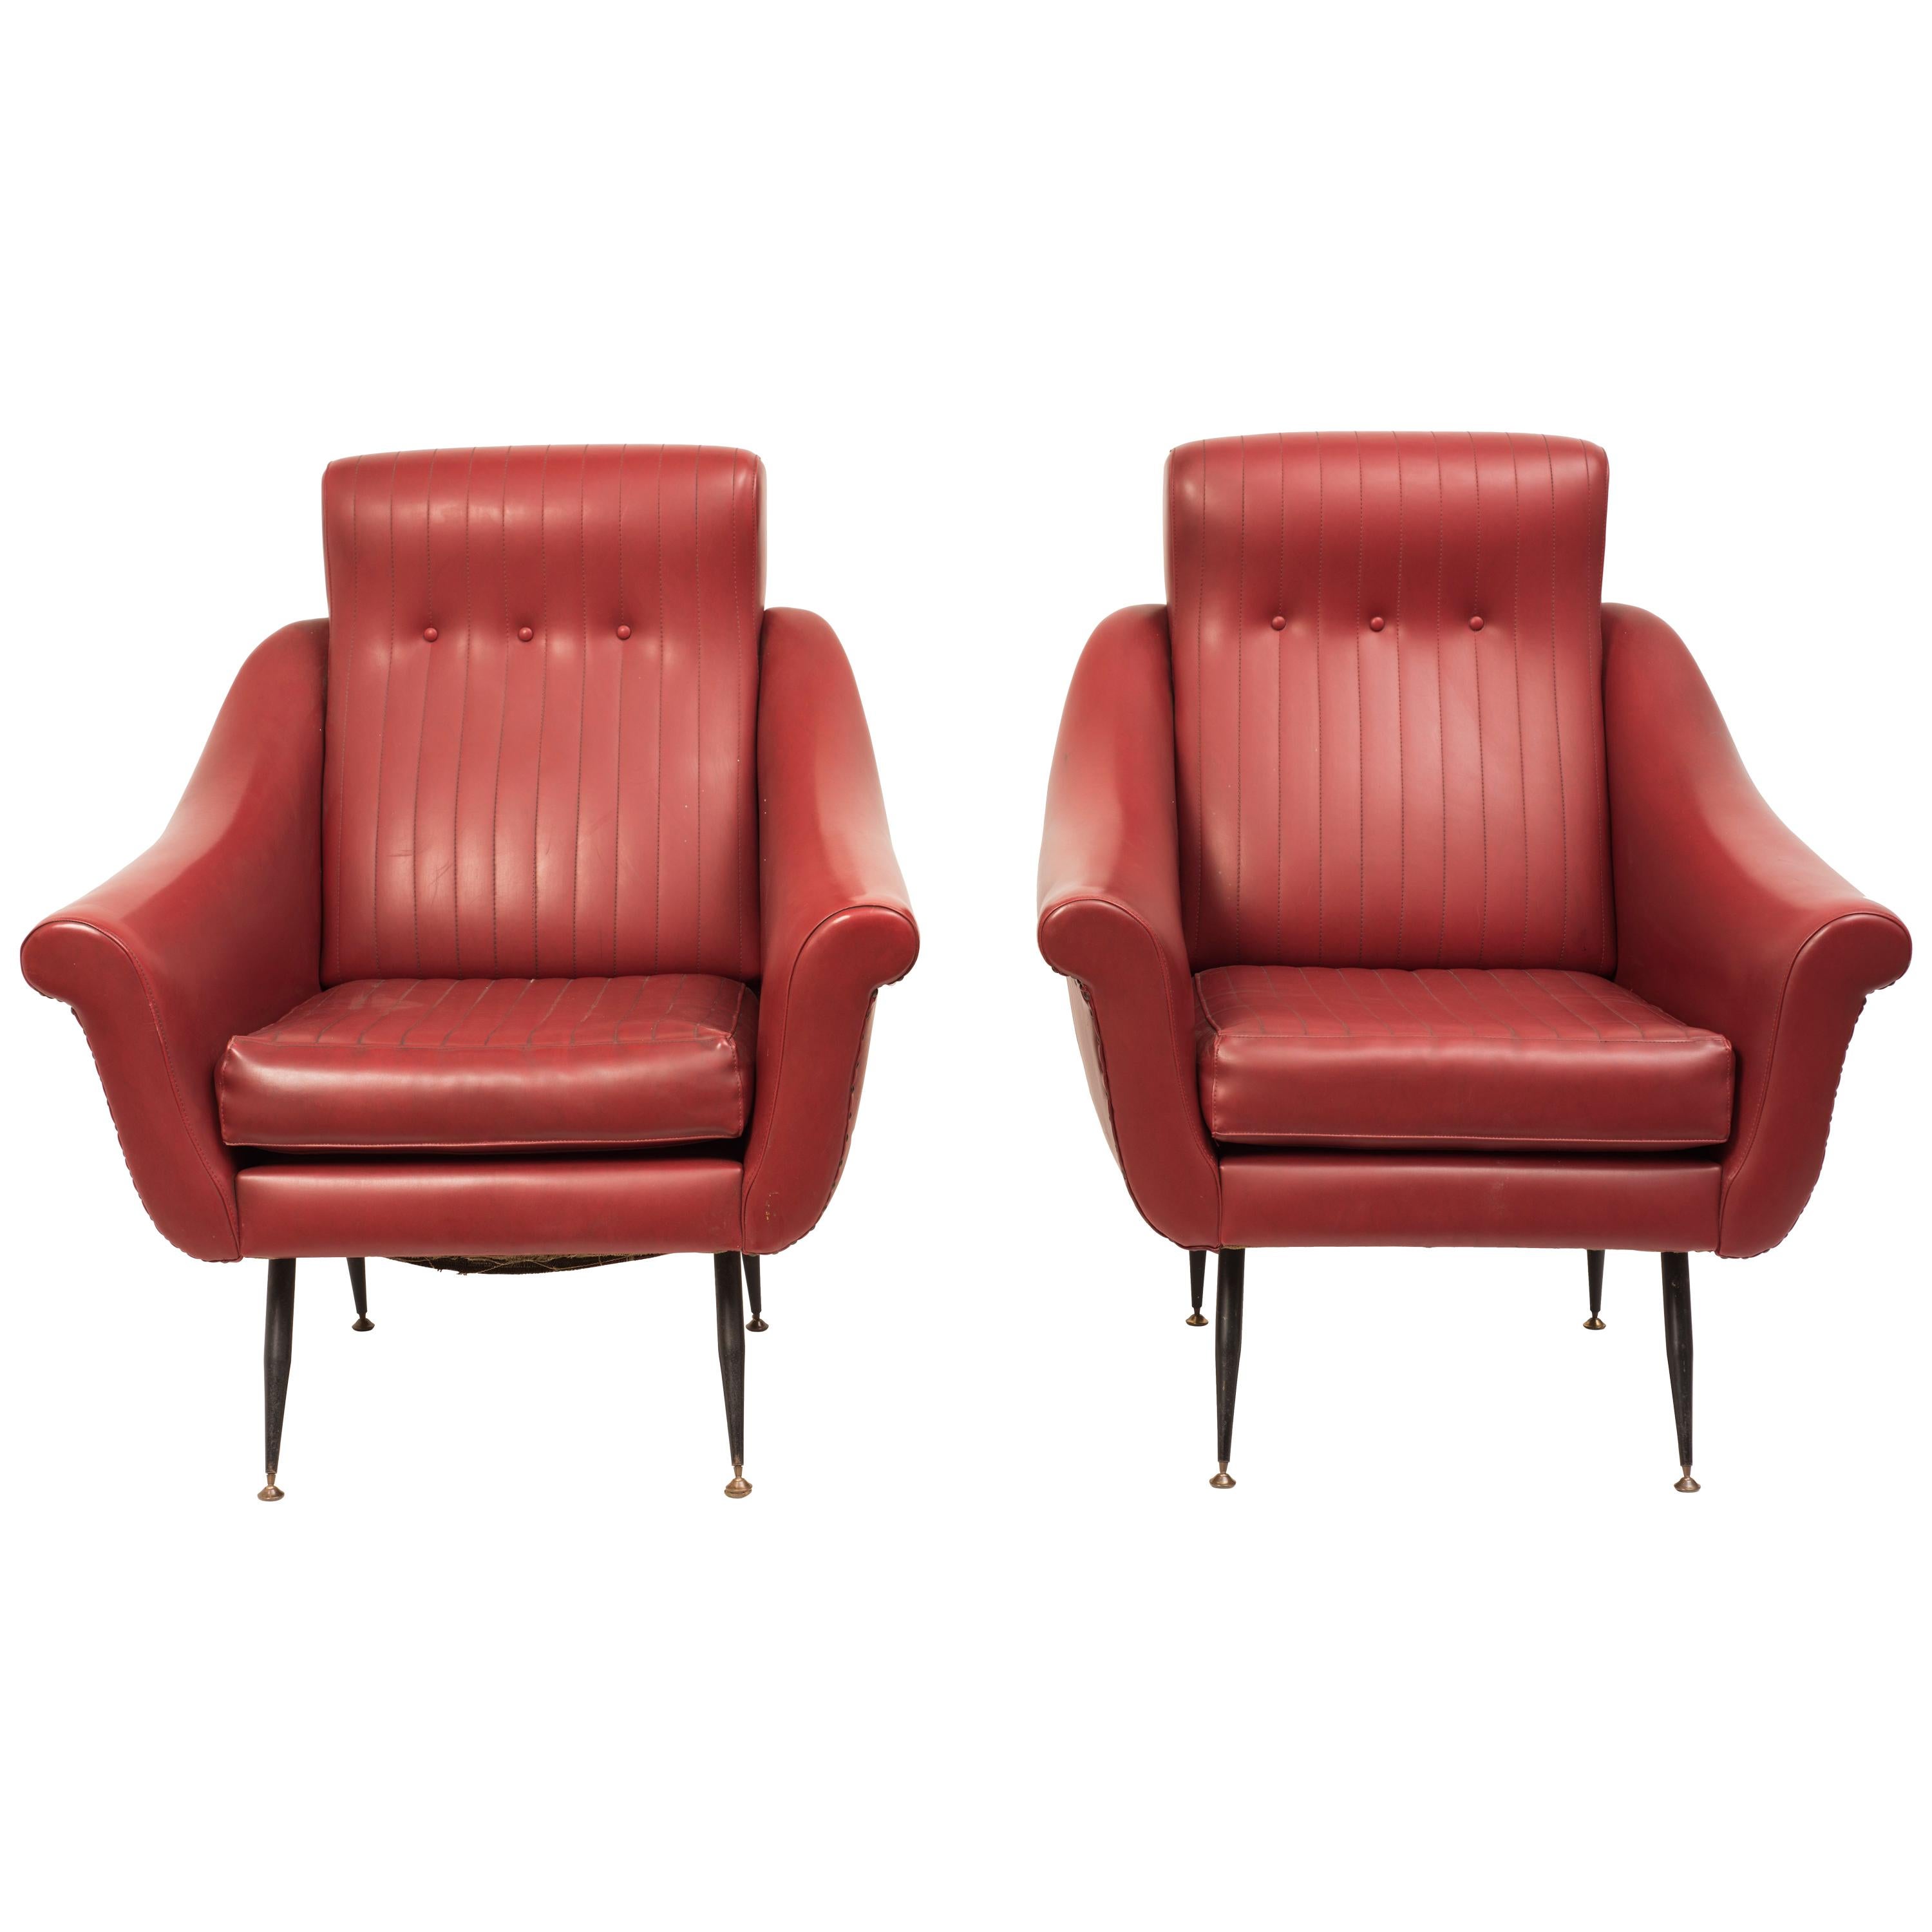 Vintage Pair of Armchairs, Italian Manufacture, 1950s